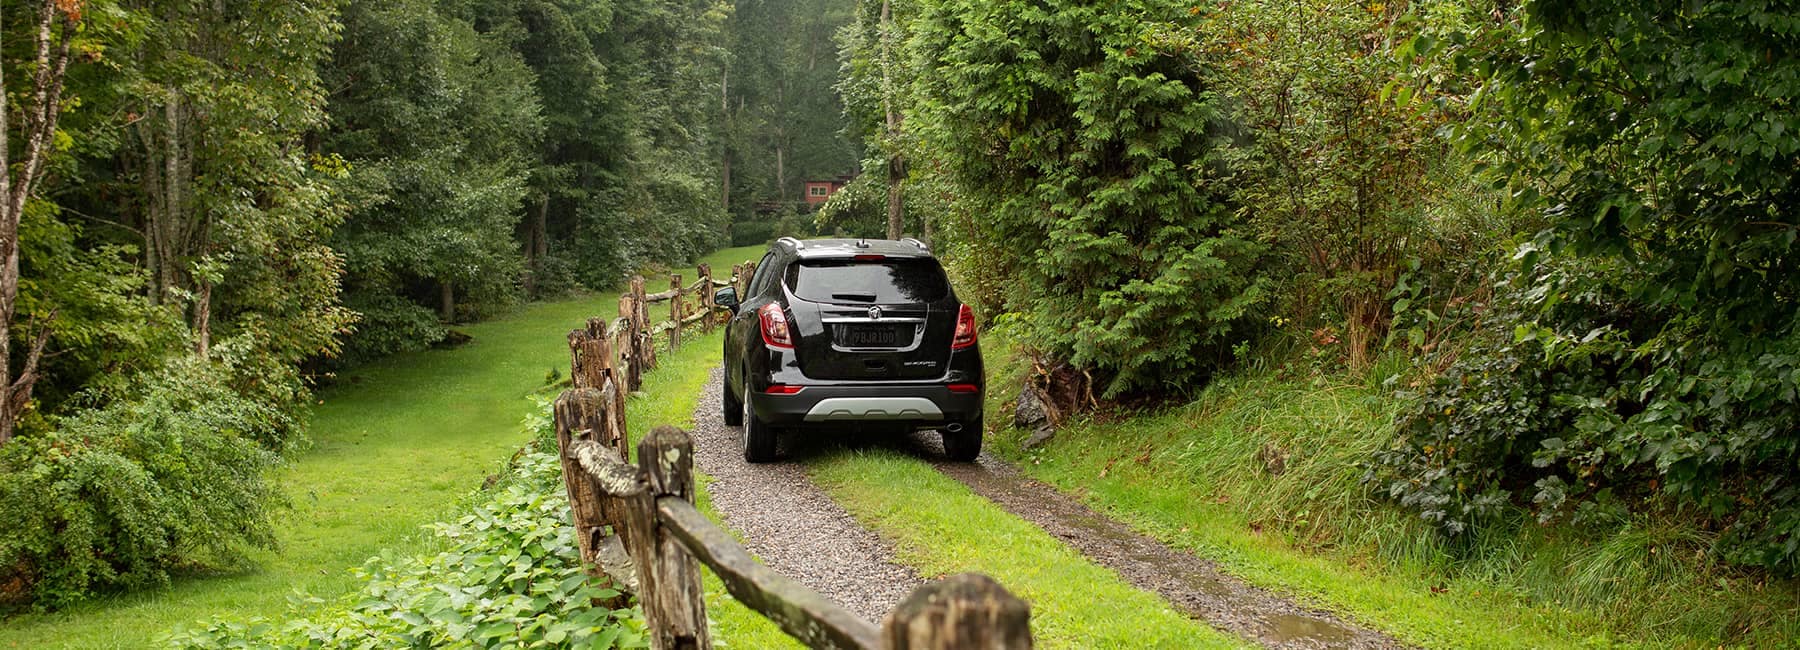 2020 Buick Encore on a Forest Path